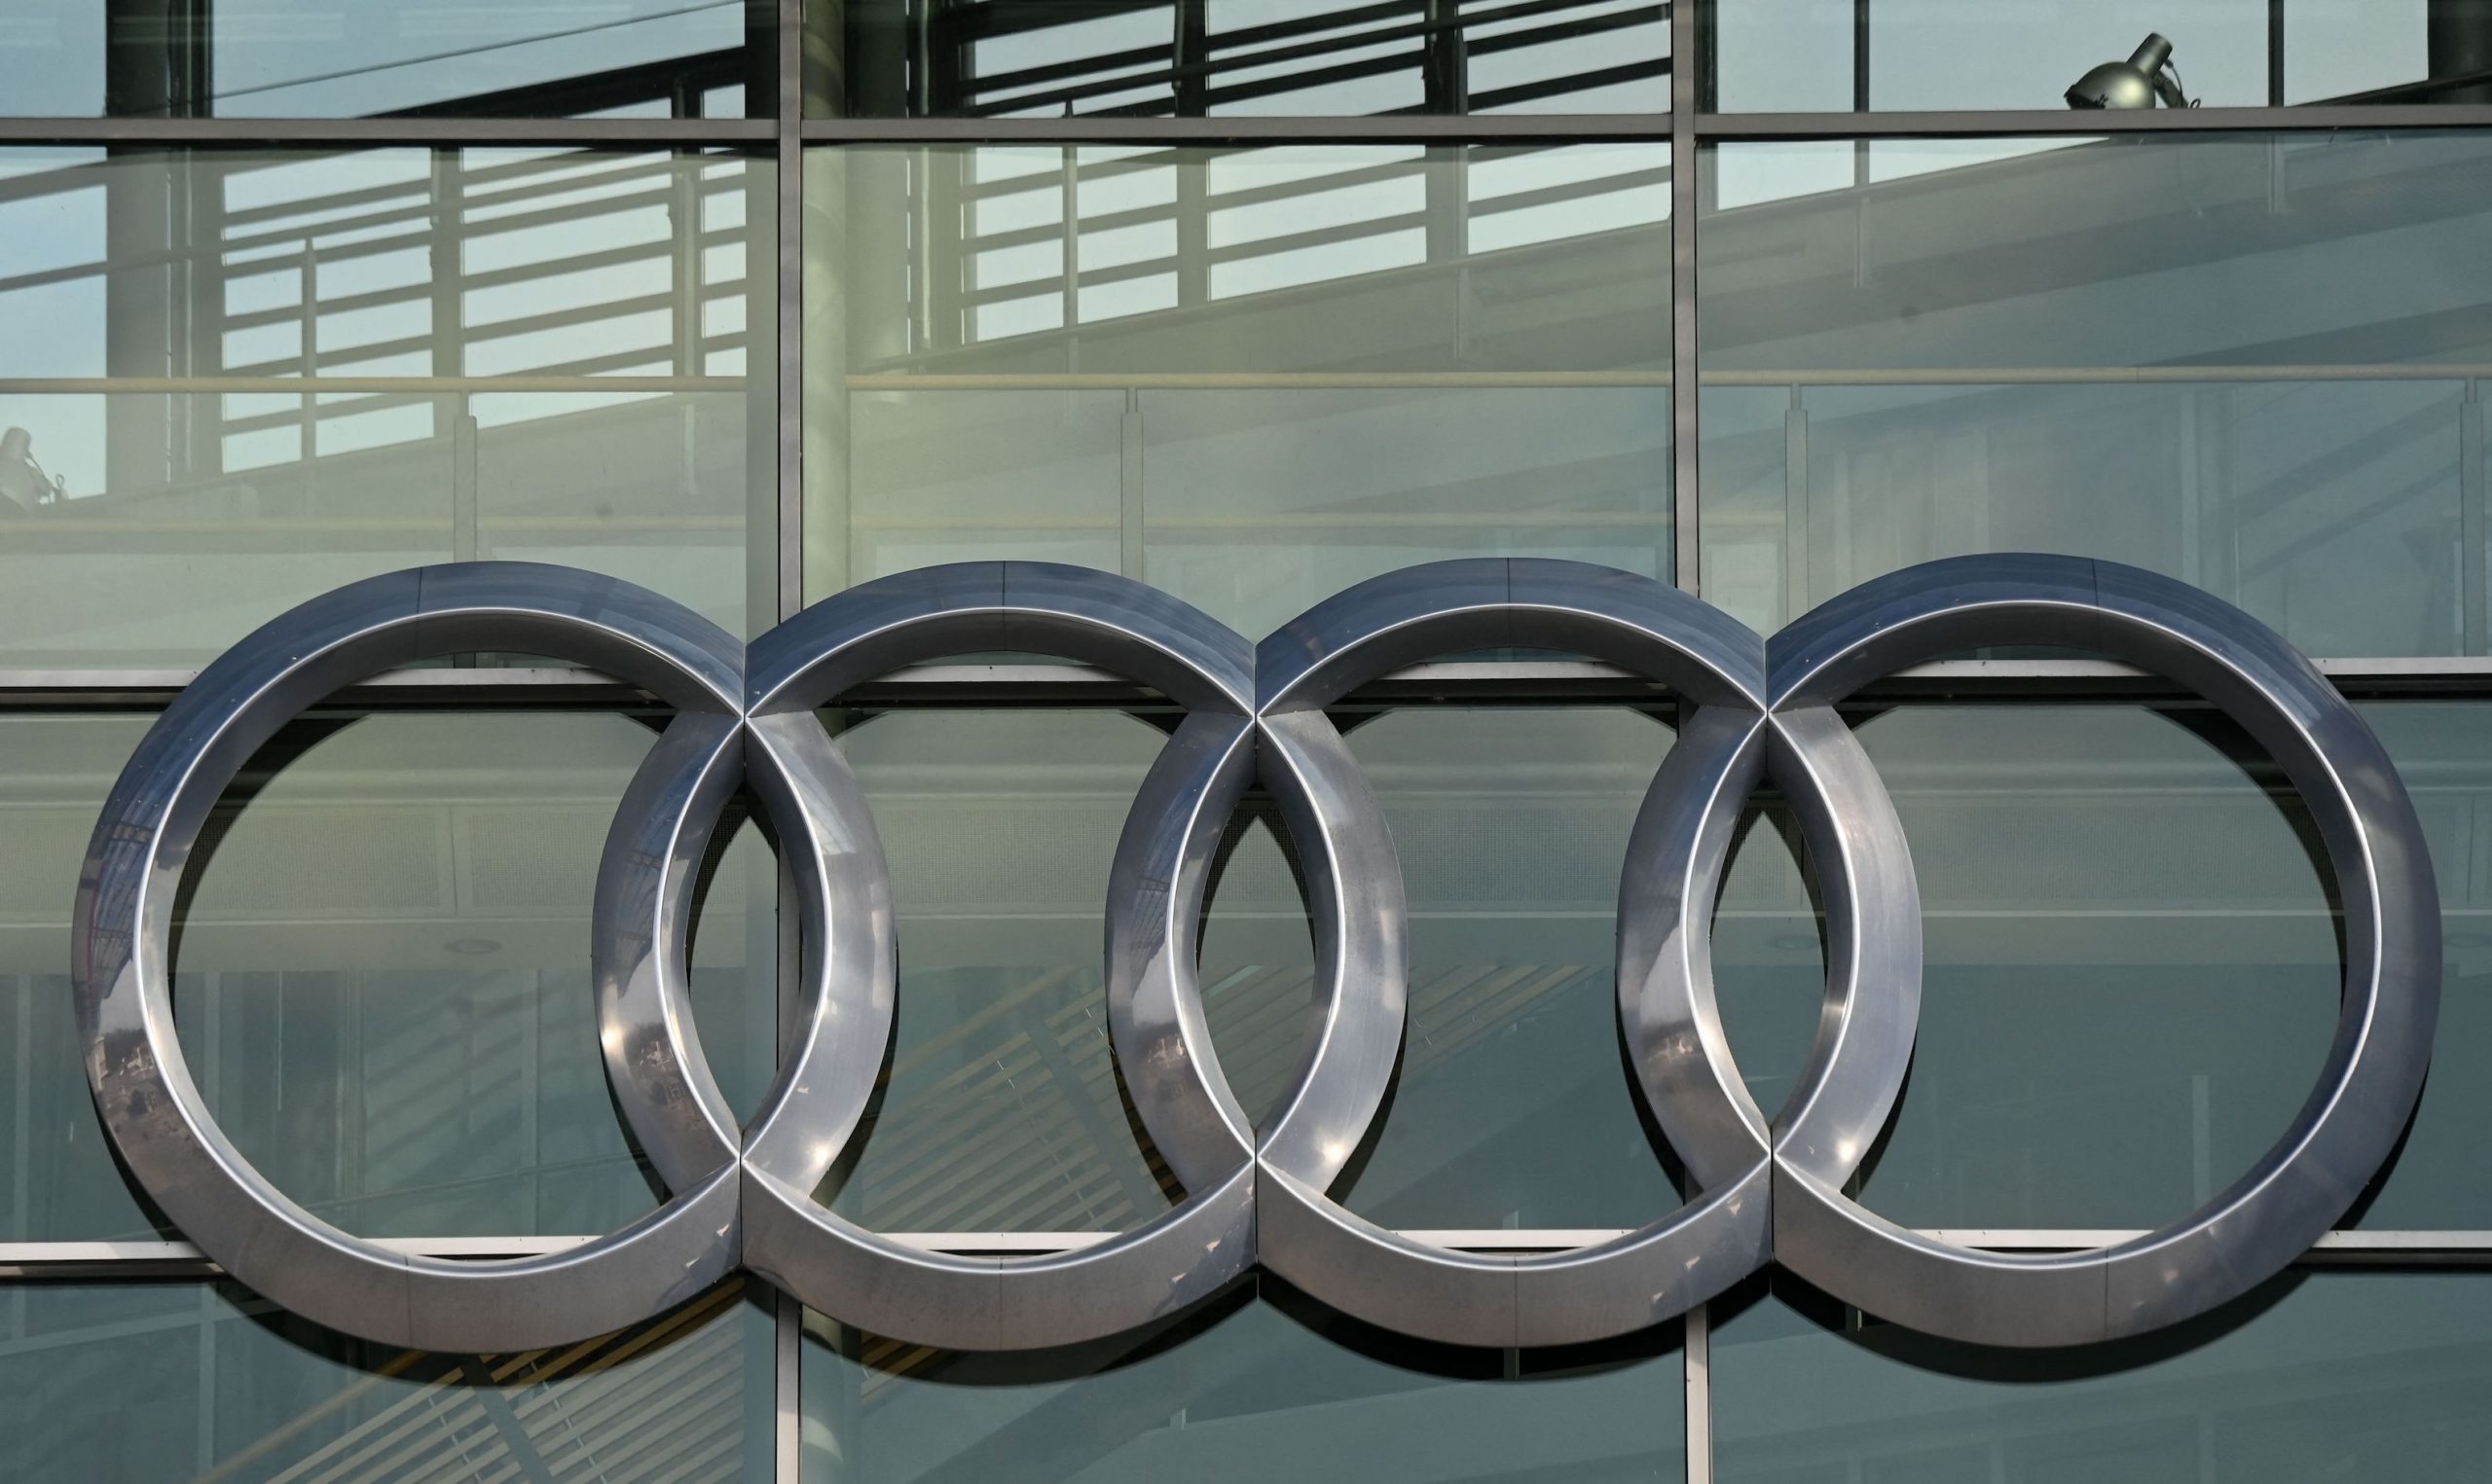 The logo of the German carmaker Audi is seen on March 18, 2021 at their headquarters in Ingolstadt, southern Germany